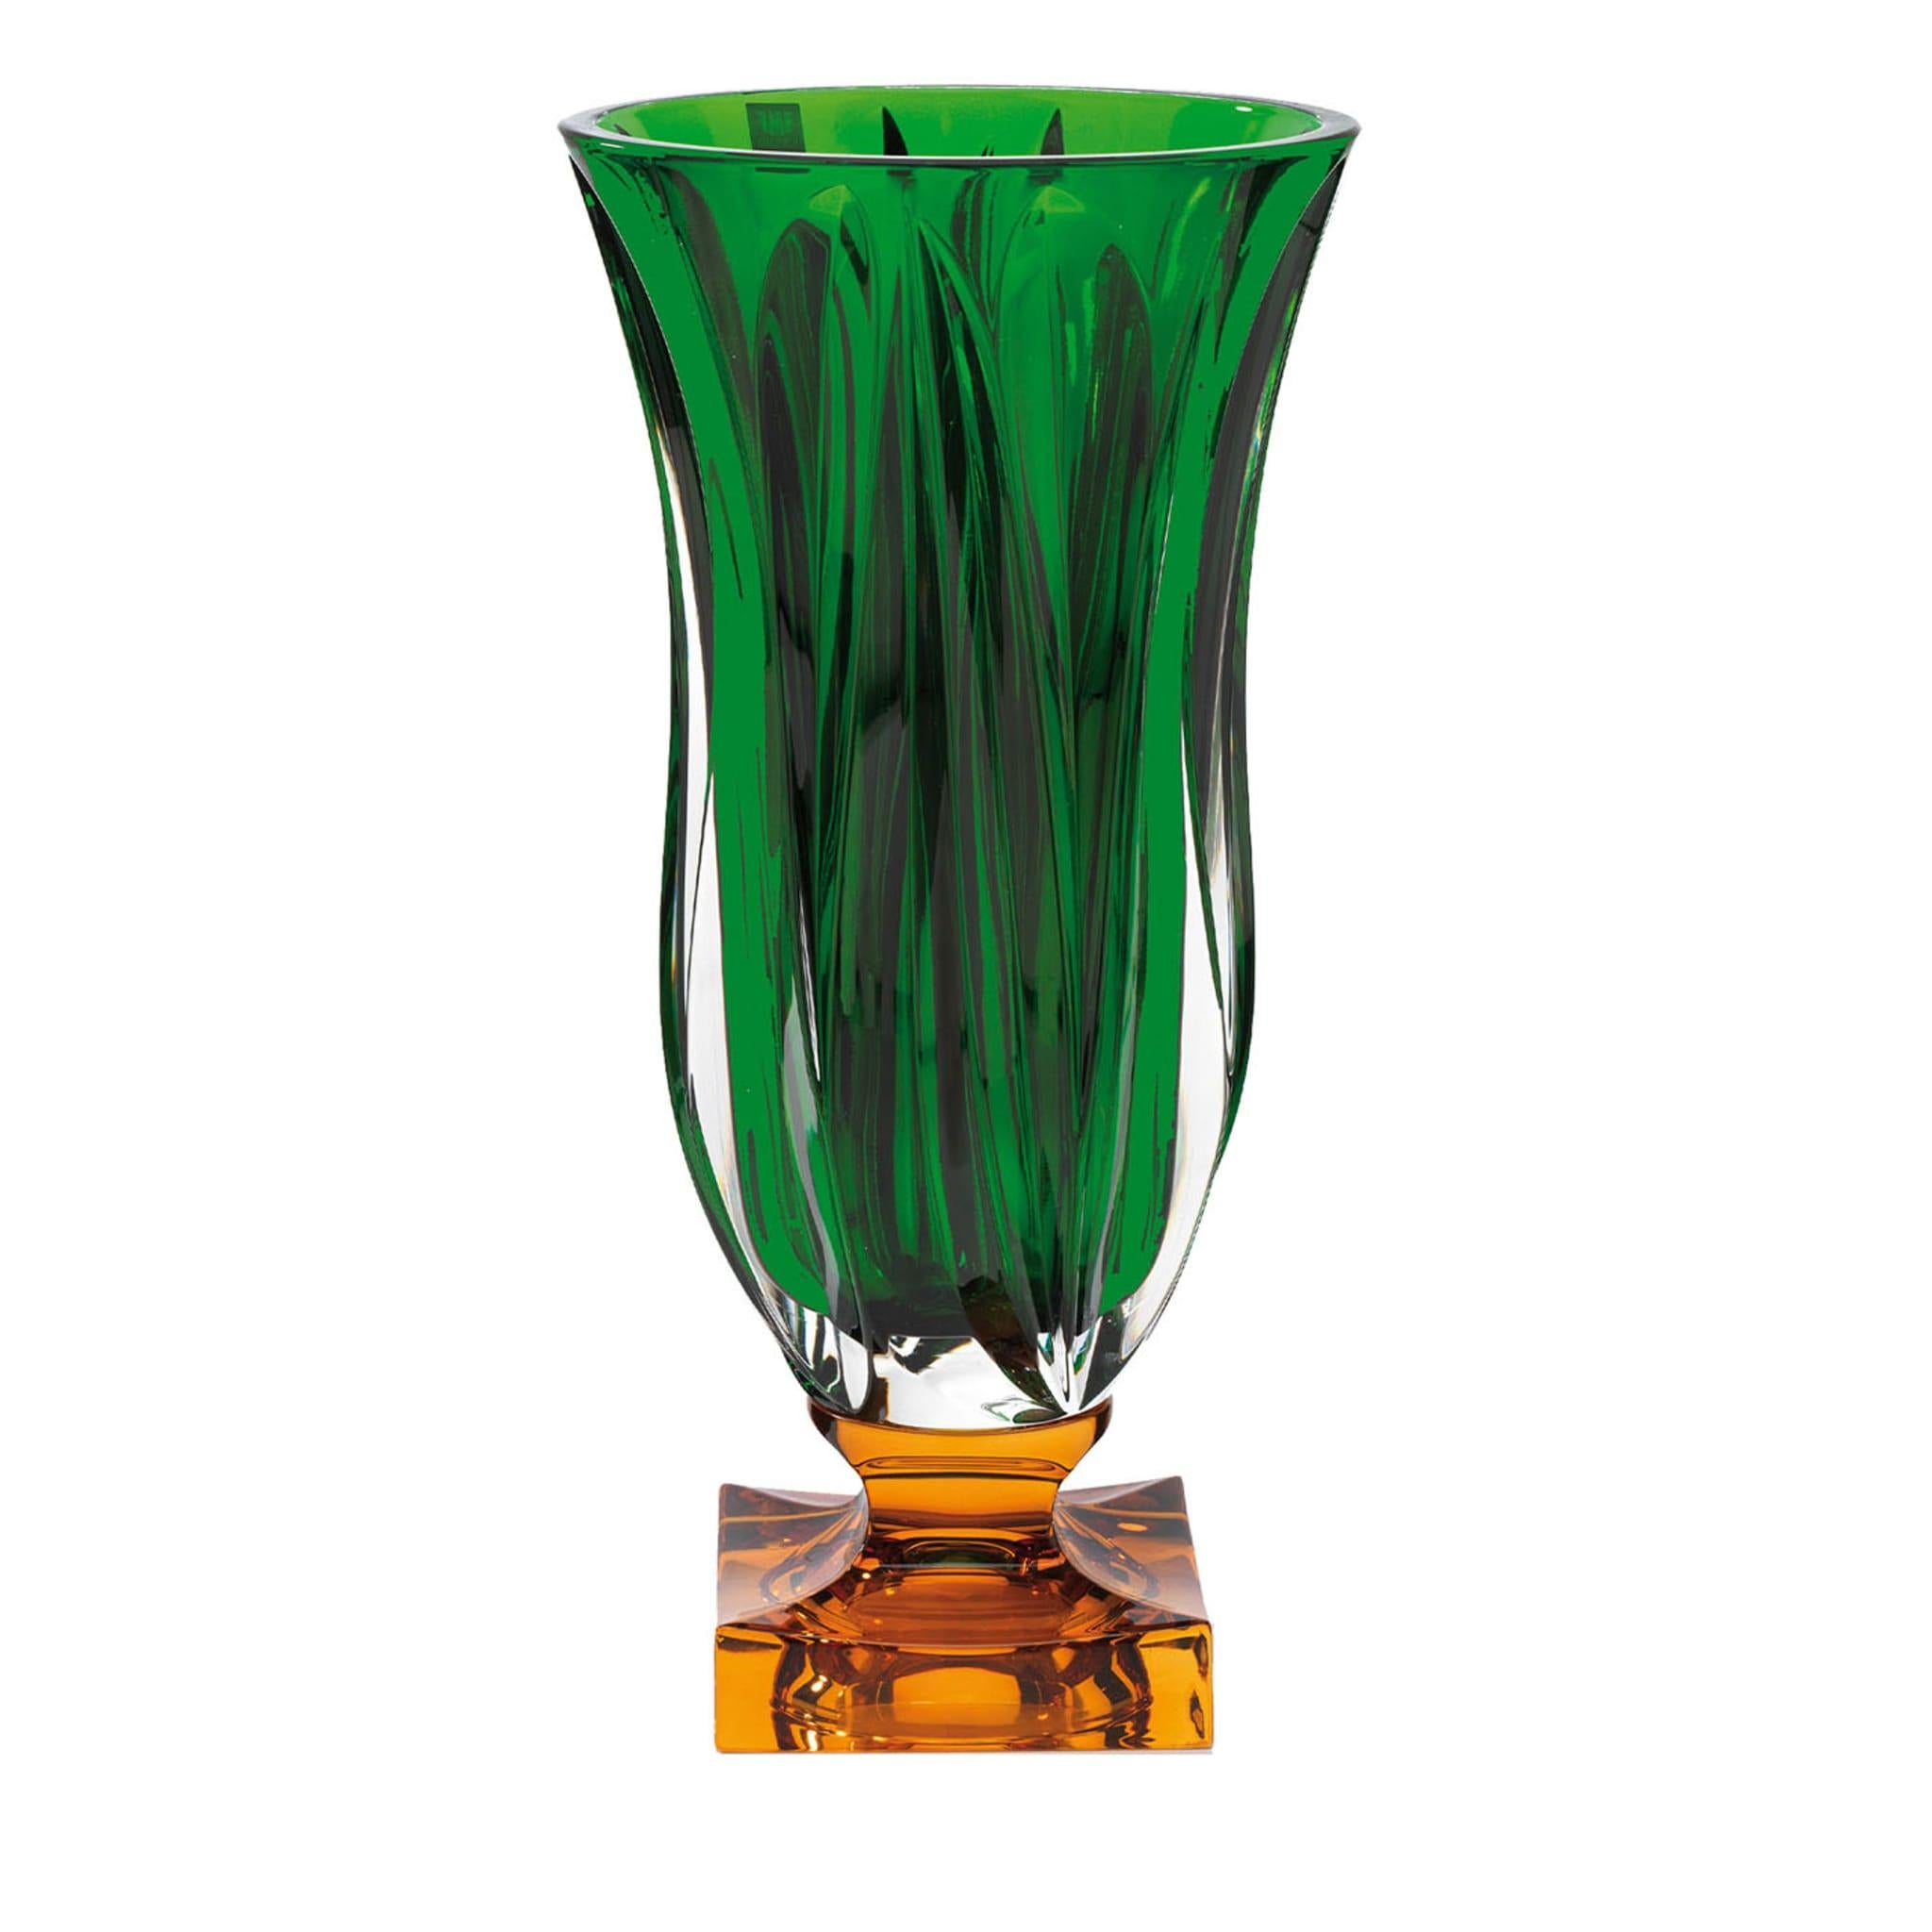 A superb dash of color and elegant texture distinguish this stunning crystal vase of the Cube Collection. A short, clear stem links the round foot with the elongated bowl, both in vibrant emerald green. The bowl's is hand decorated with repeating